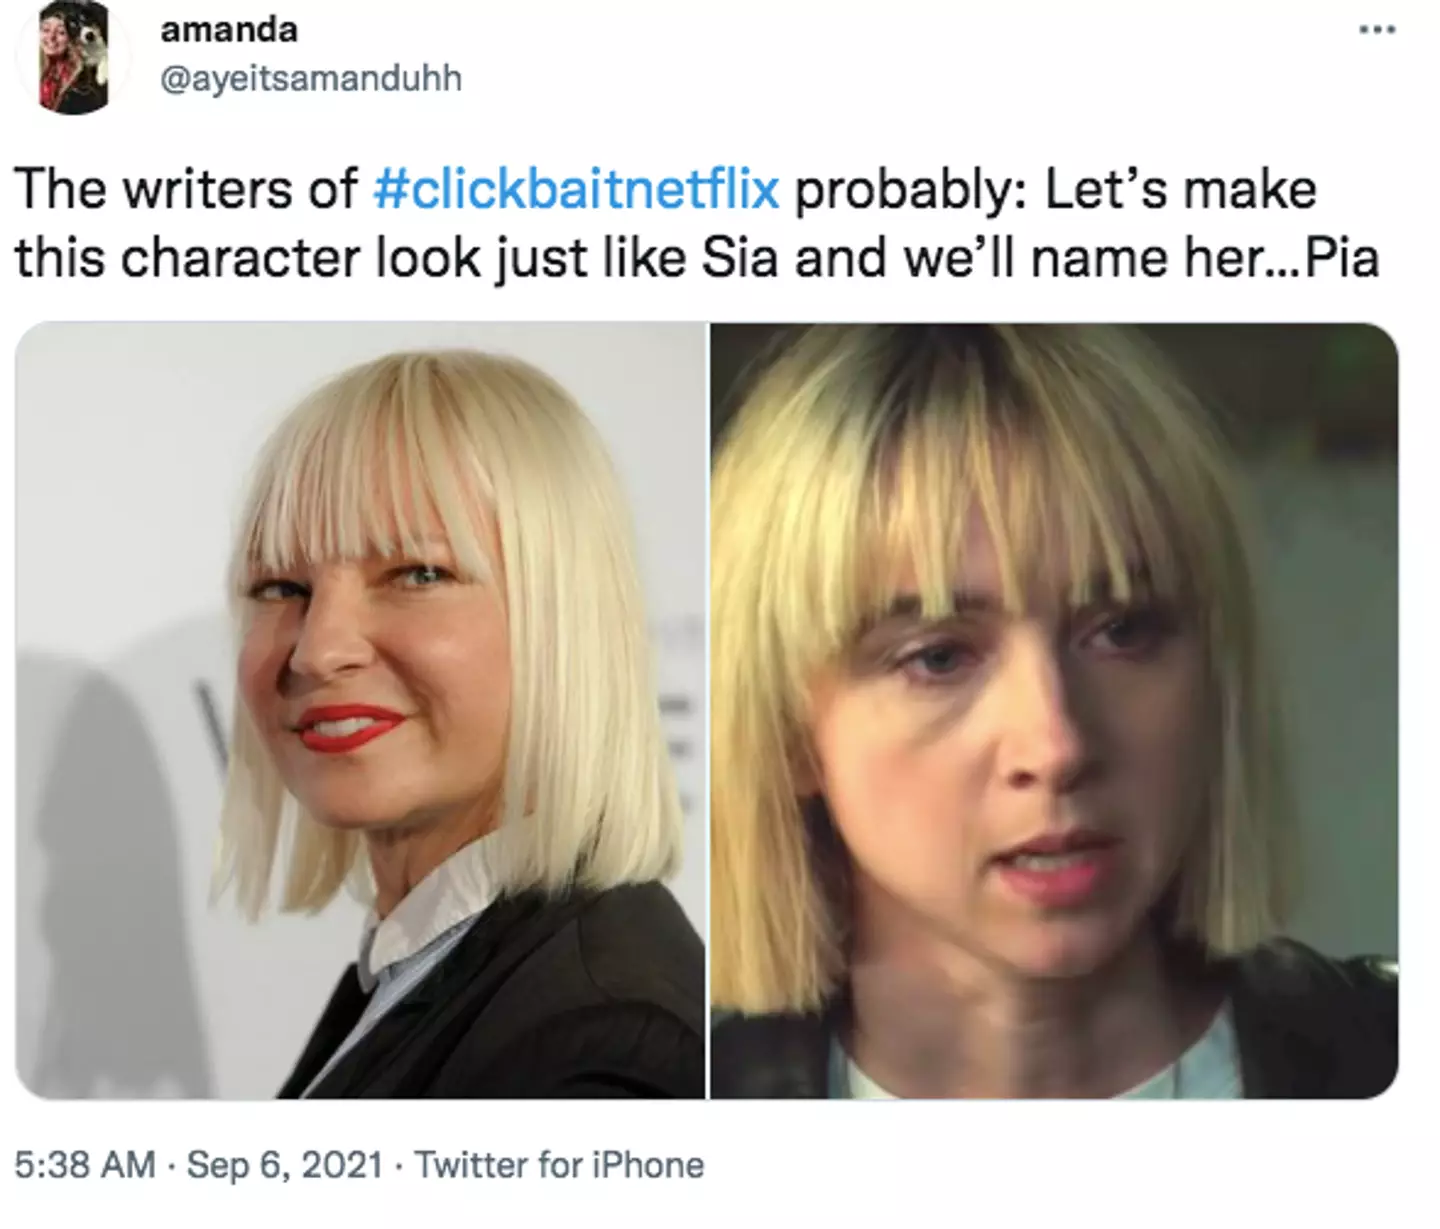 People drew comparisons to Sia (